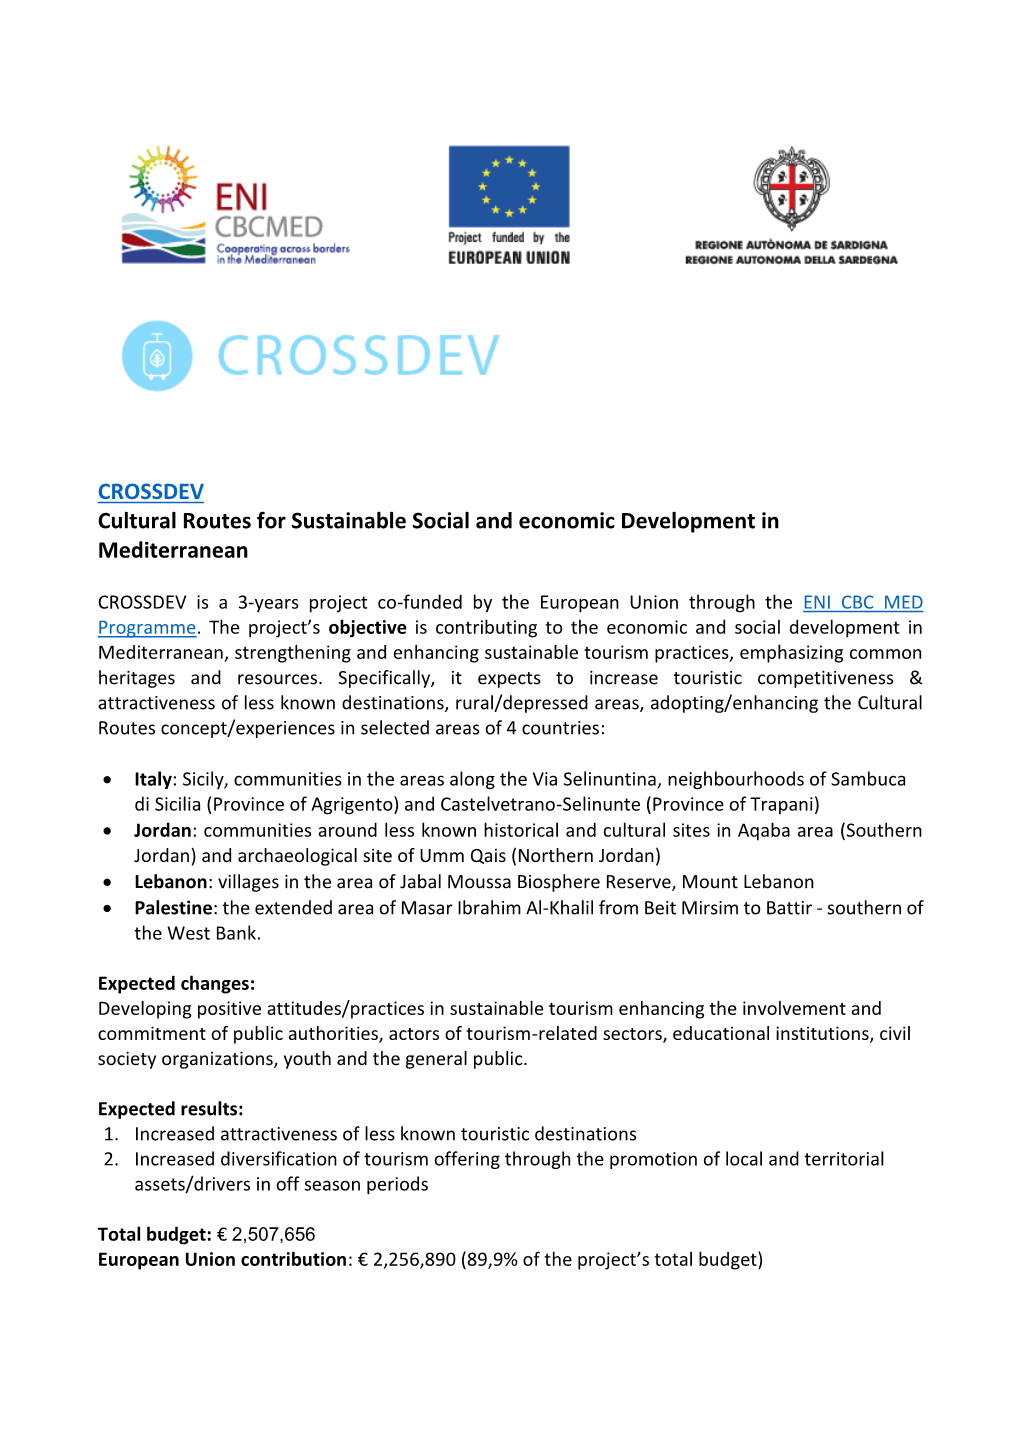 CROSSDEV Cultural Routes for Sustainable Social and Economic Development in Mediterranean